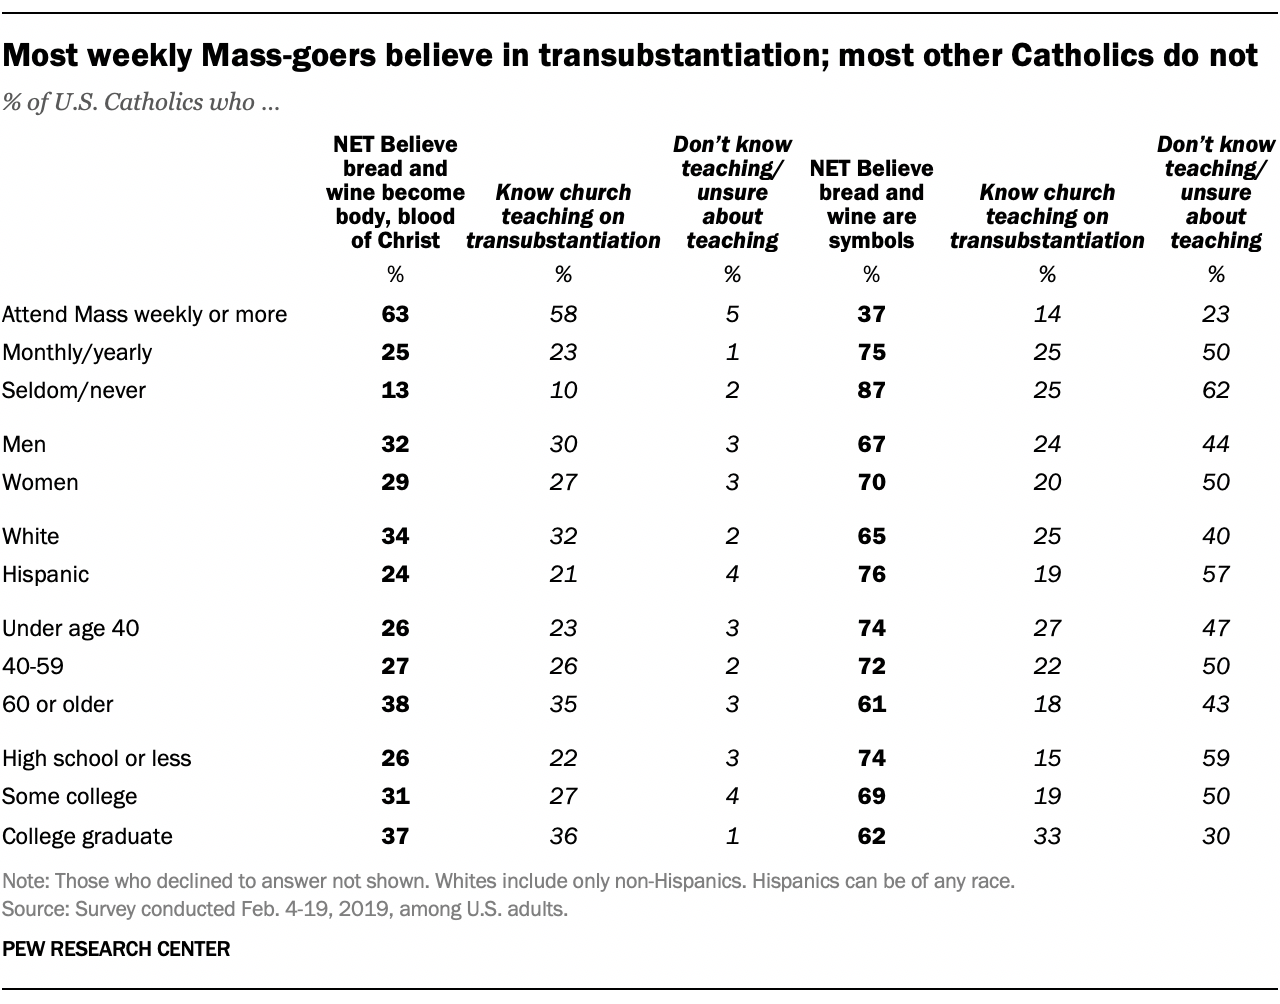 Most weekly Mass-goers believe in transubstantiation; most other Catholics do not